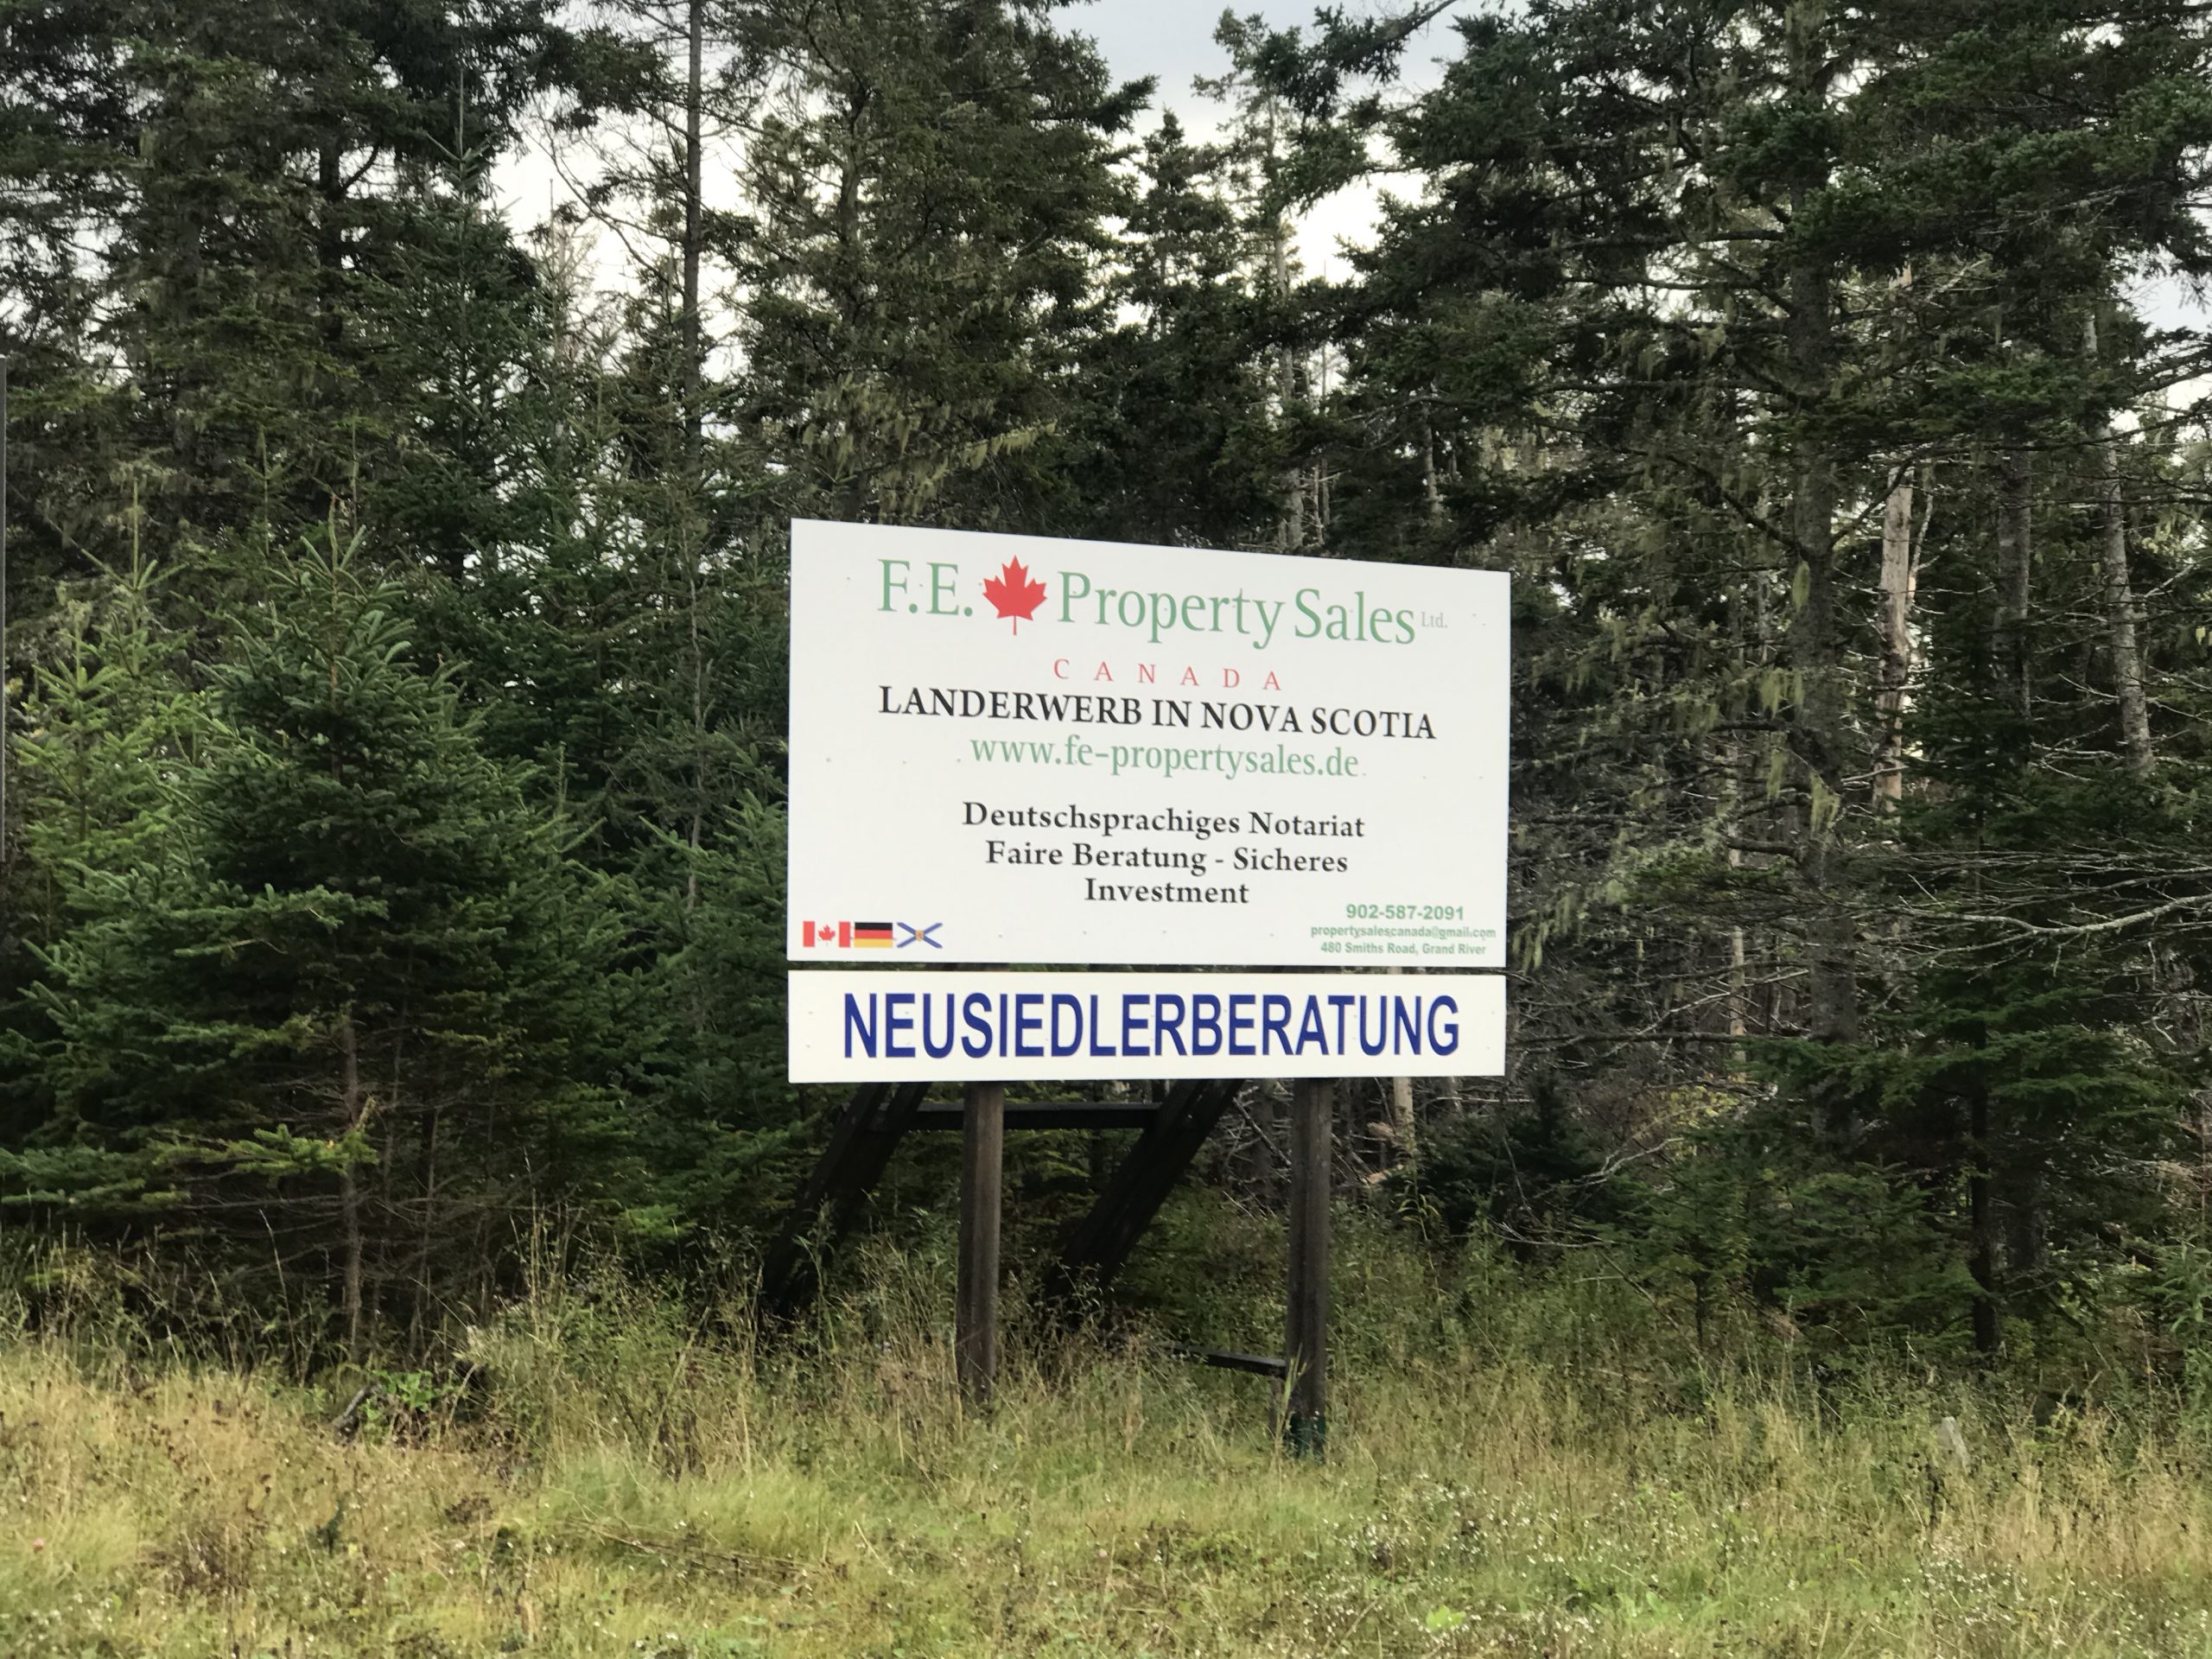 F.E. Properties billboard for “Land Purchases in Nova Scotia” in September 2021. Photo by Joan Baxter